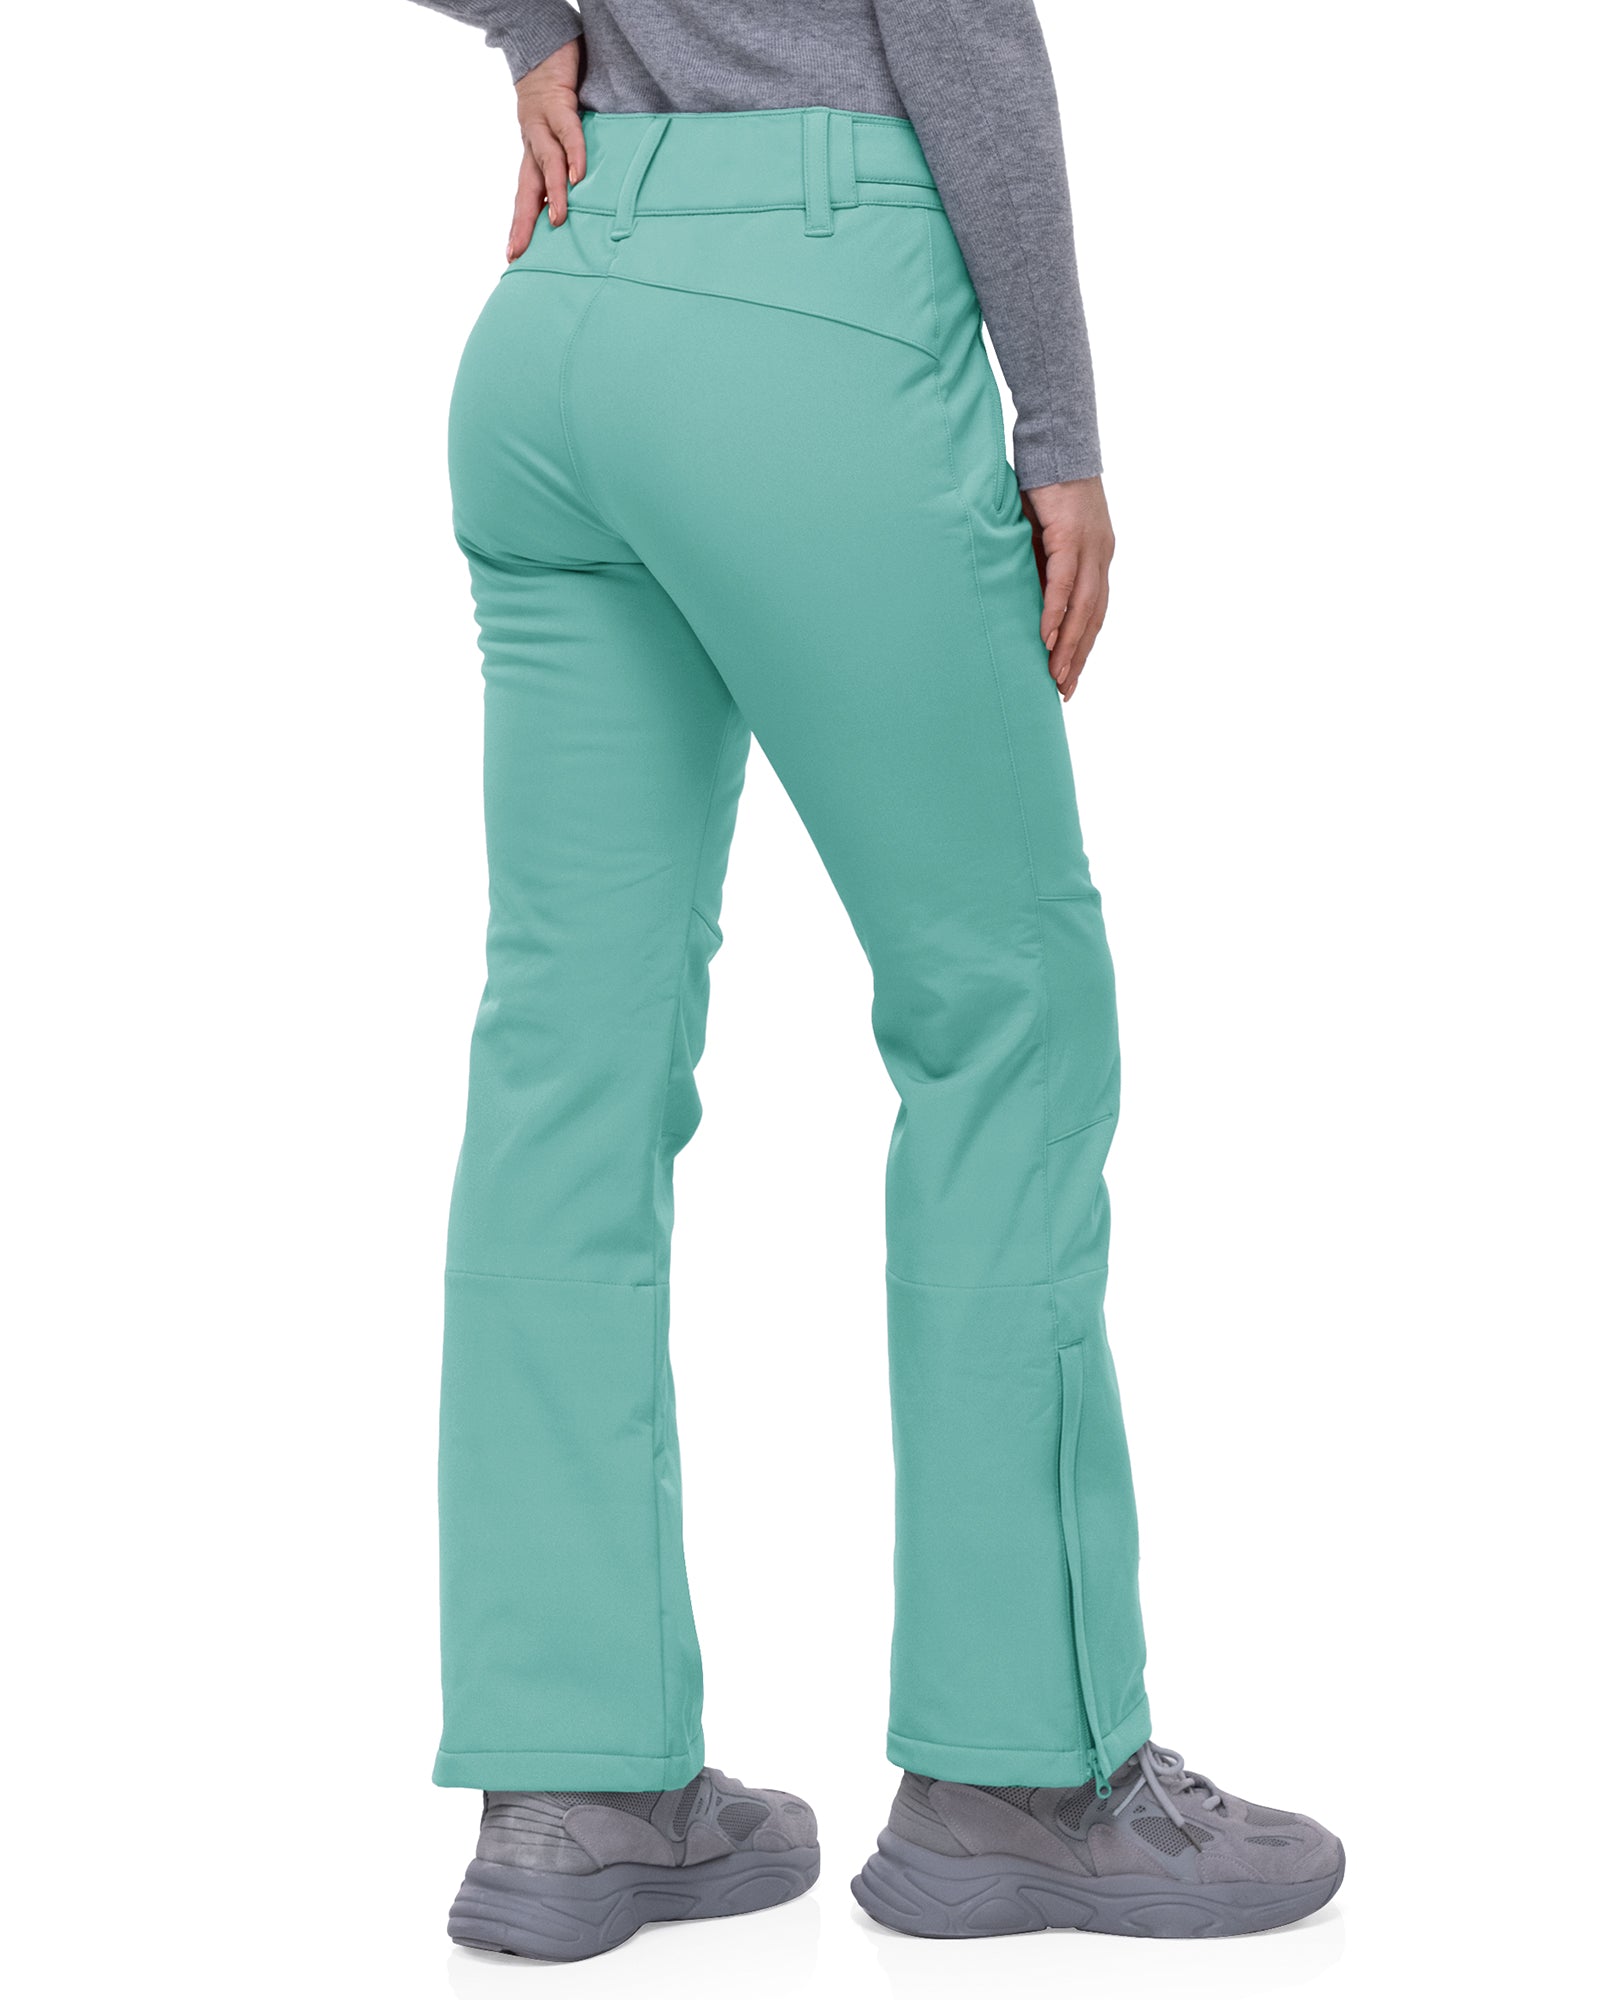 Creek Girl - Insulated Snow Pants for Girls